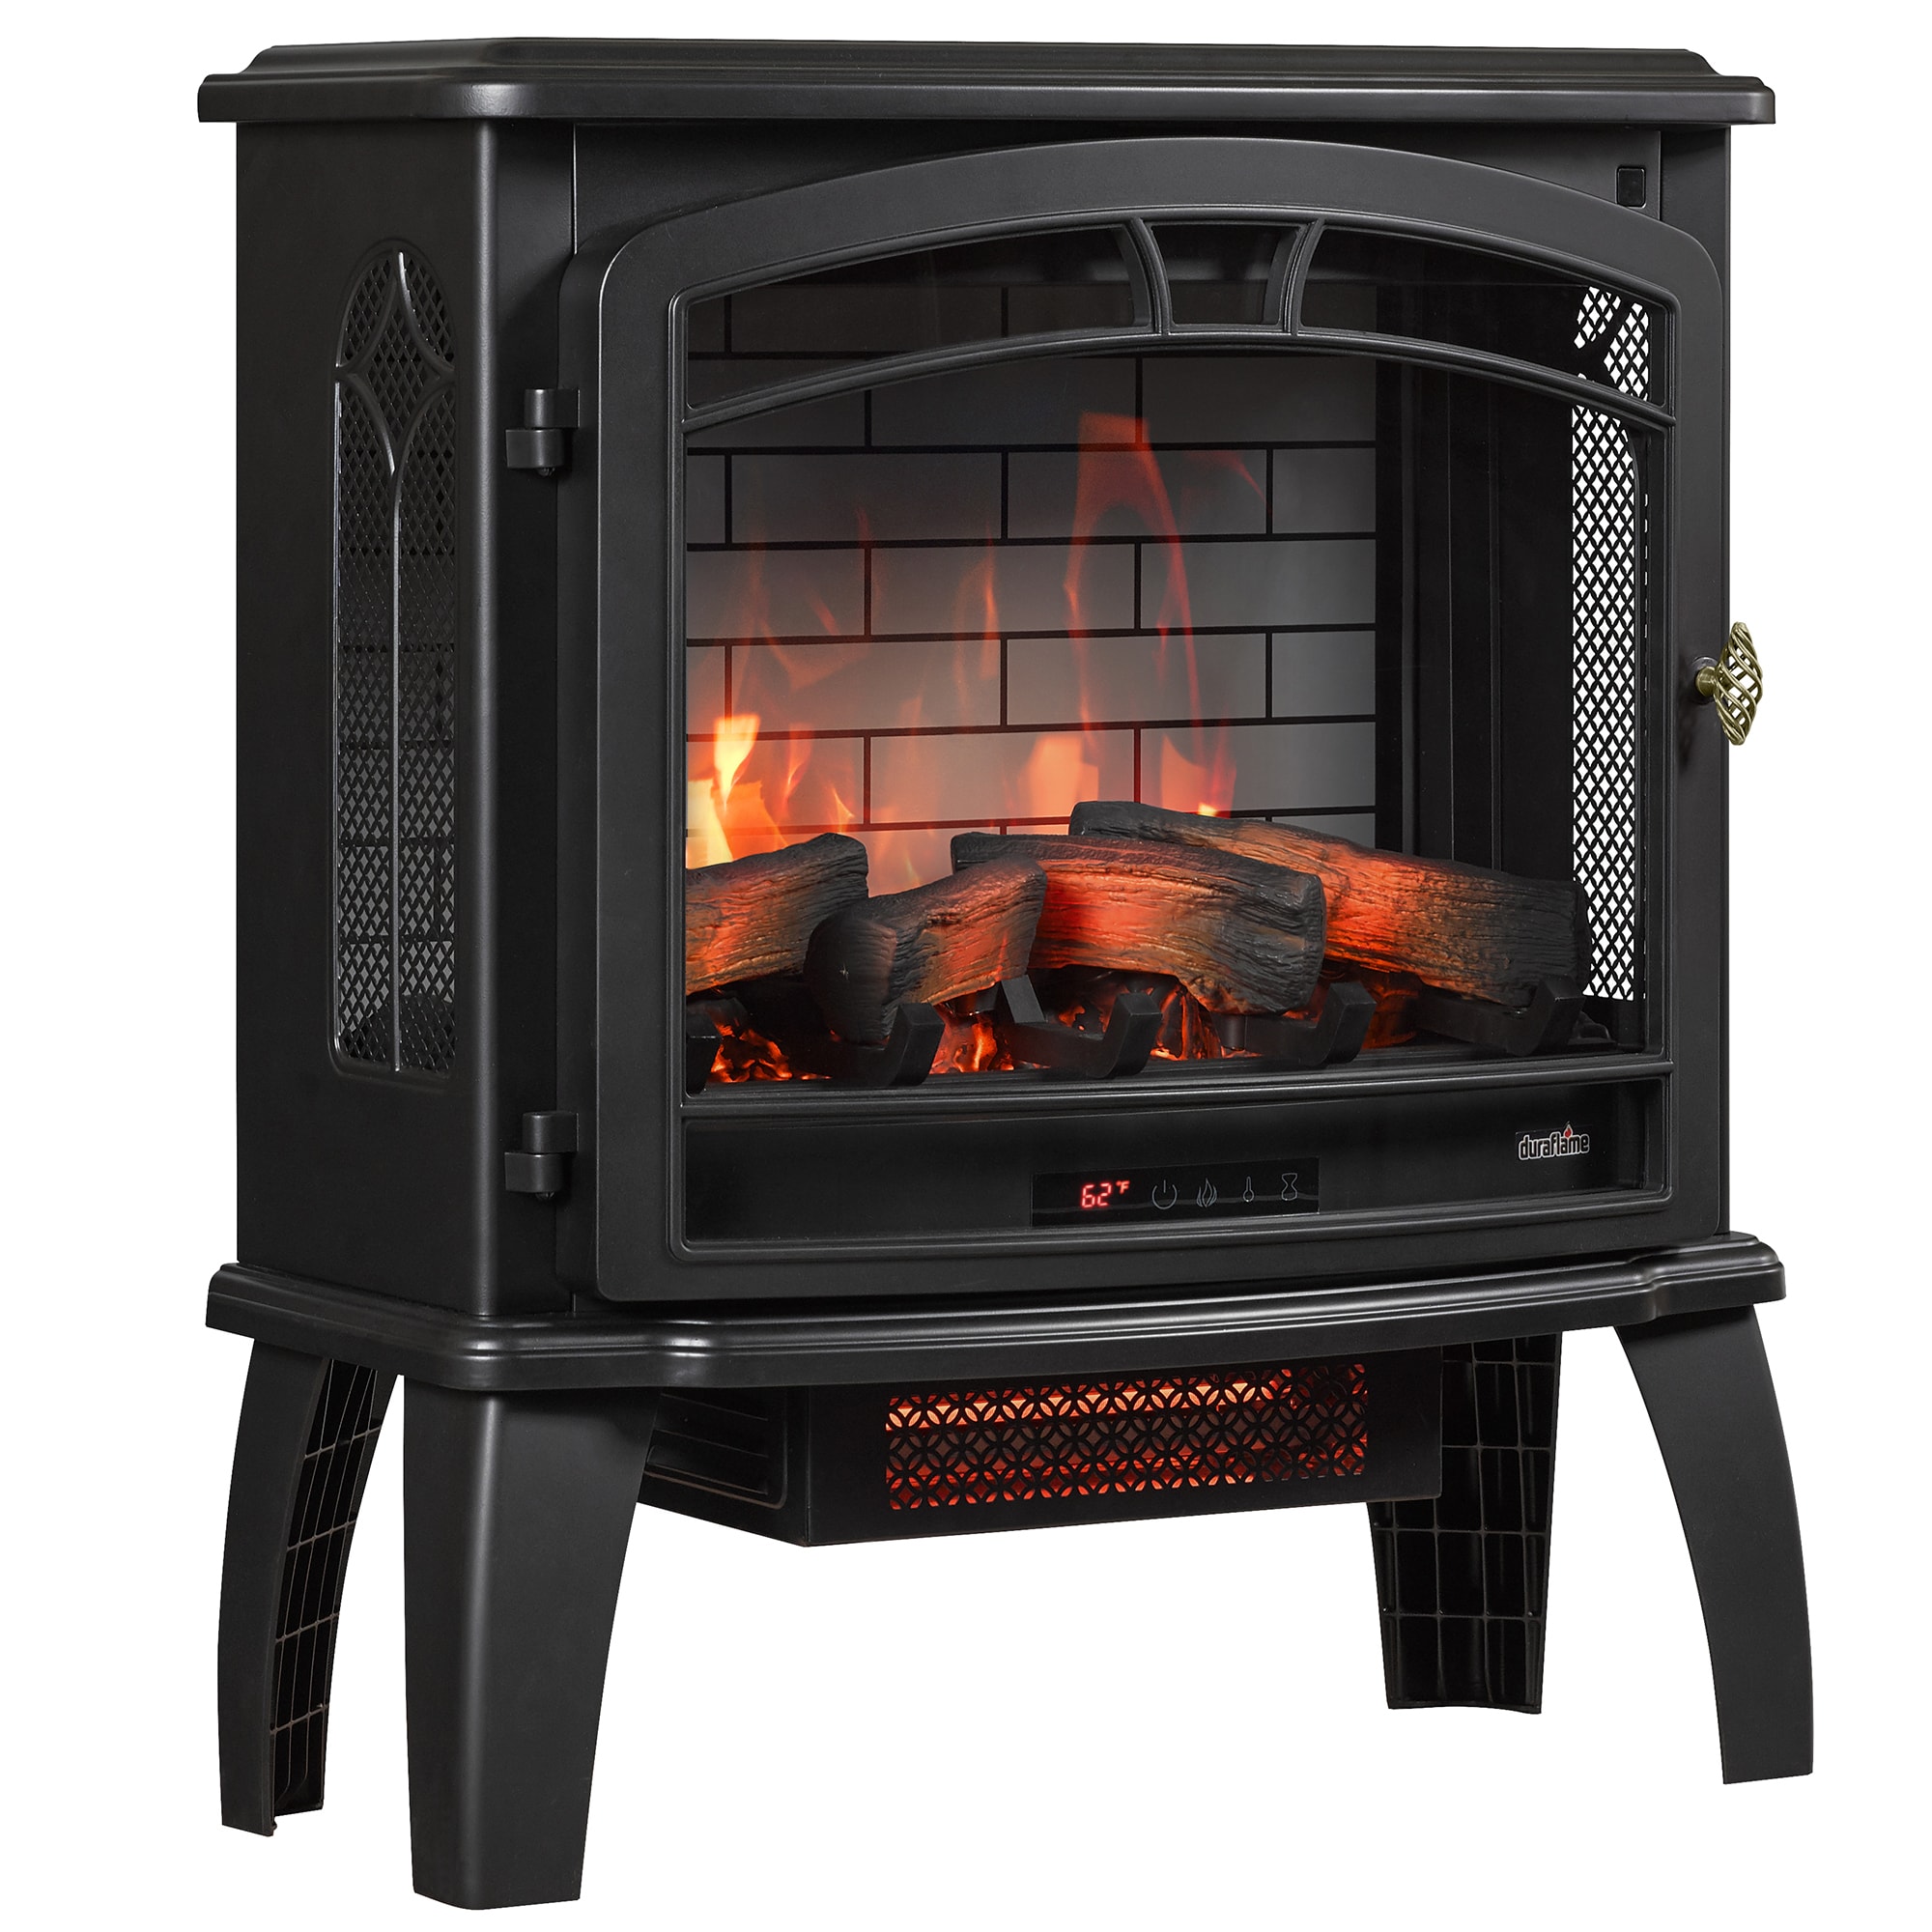 Duraflame Infrared Quartz, Which Is Better Infrared Or Electric Fireplace